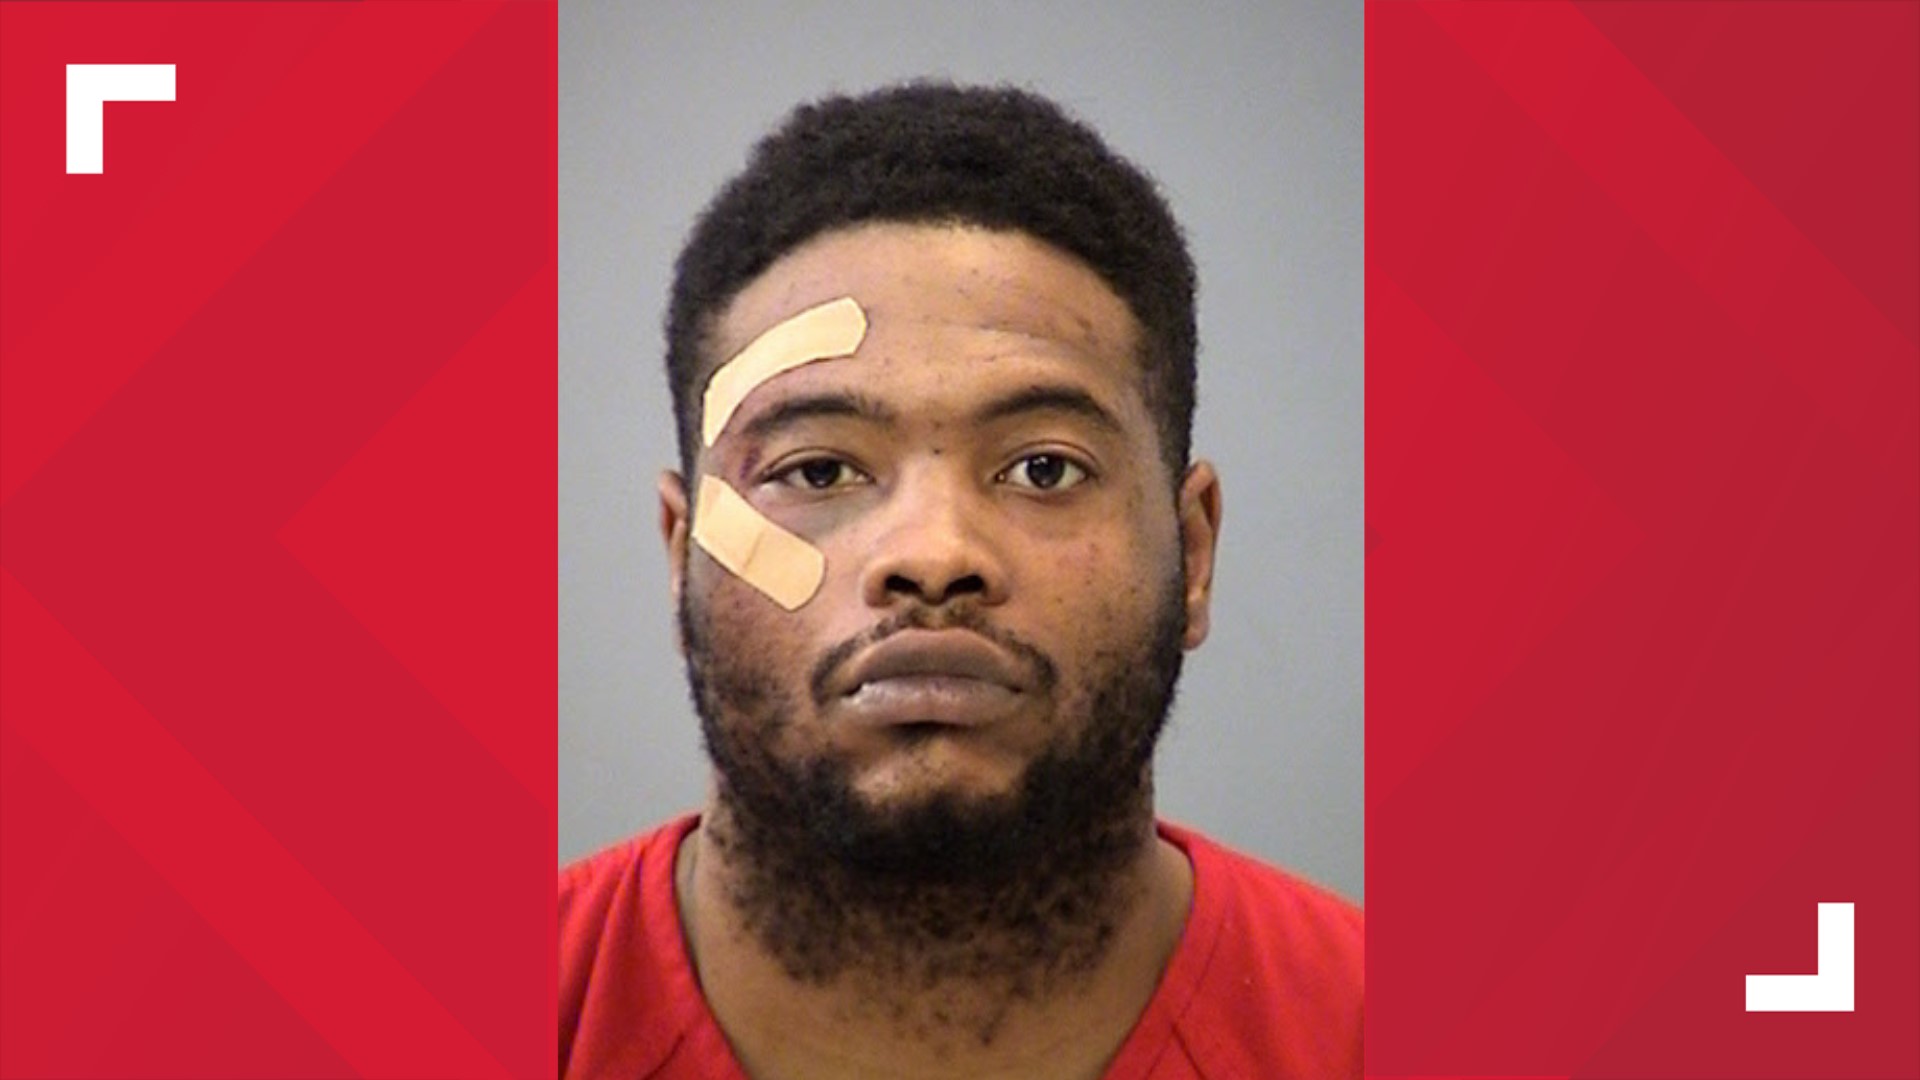 Elliahs Dorsey is accused of murdering Officer Breann Leath on April 9, 2020, while she and three other officers were responding to a domestic disturbance call.